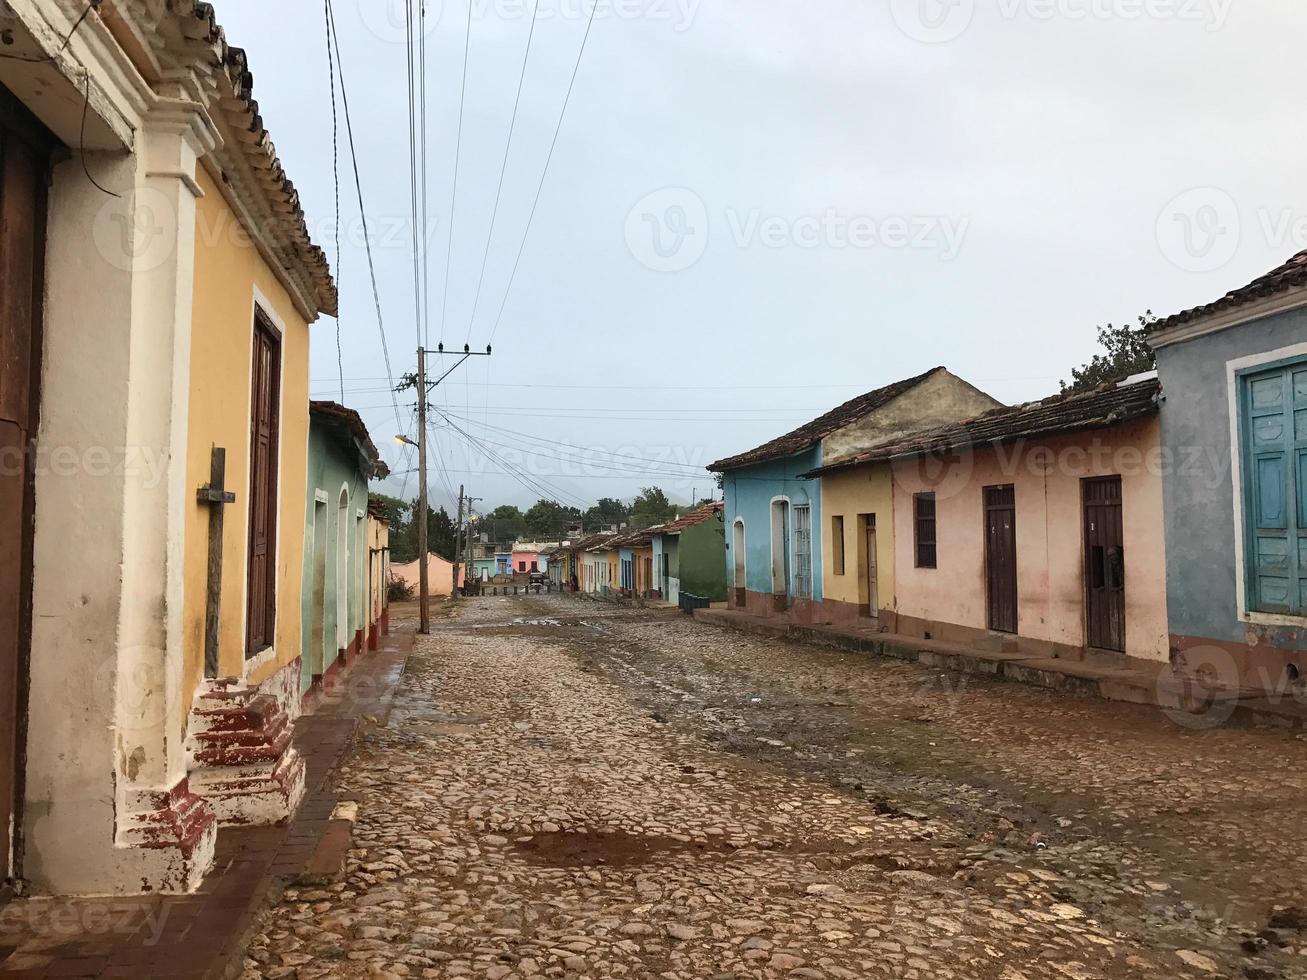 Streets of Old Trinidad, Cuba, a UNESCO world heritage site. photo